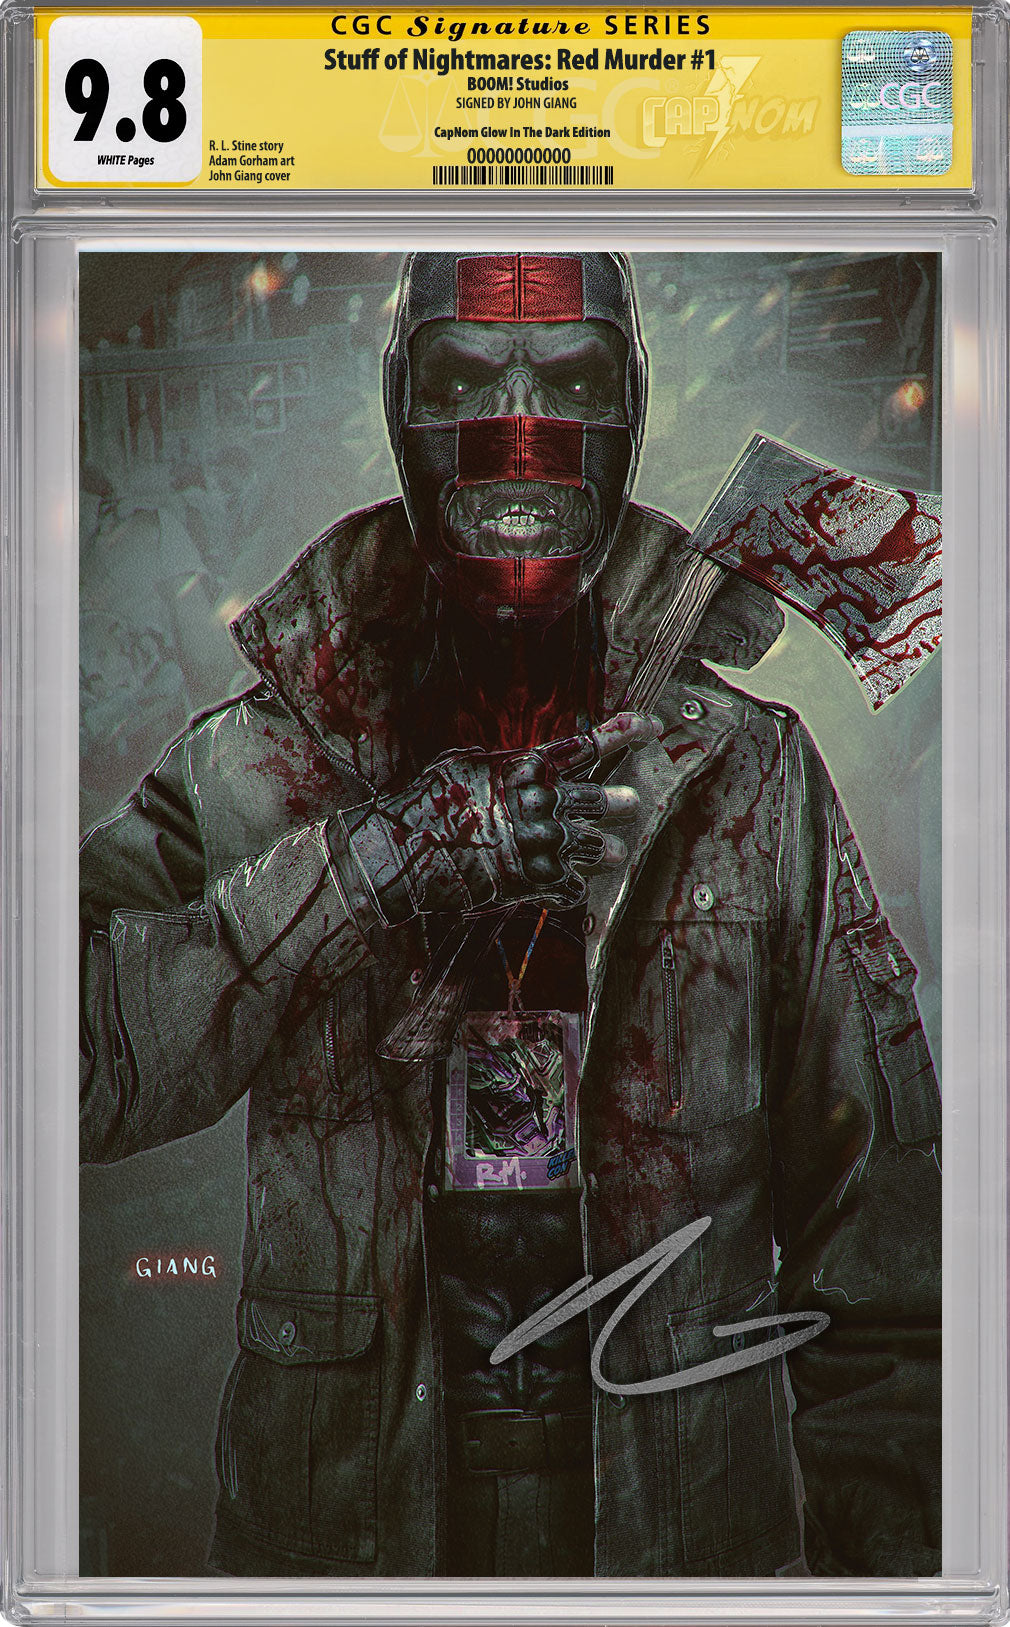 STUFF OF NIGHTMARES:RED MURDER ONE SHOT GLOW IN THE DARK COVER BY JOHN GIANG CGC SIG SERIES SIGNED BY JOHN GIANG